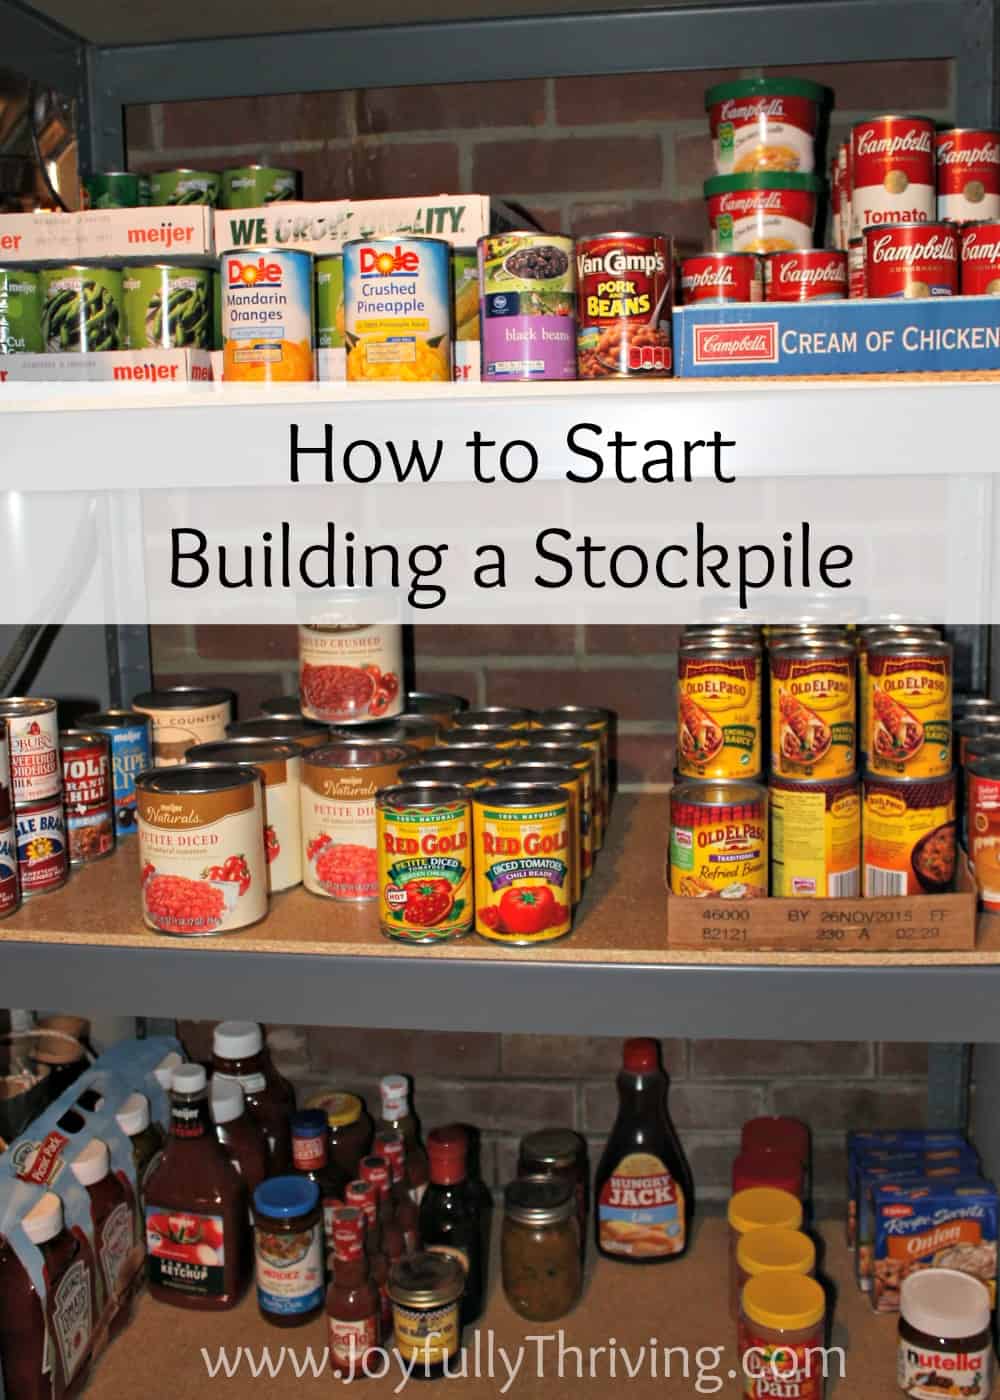 How to Start Building a Stockpile